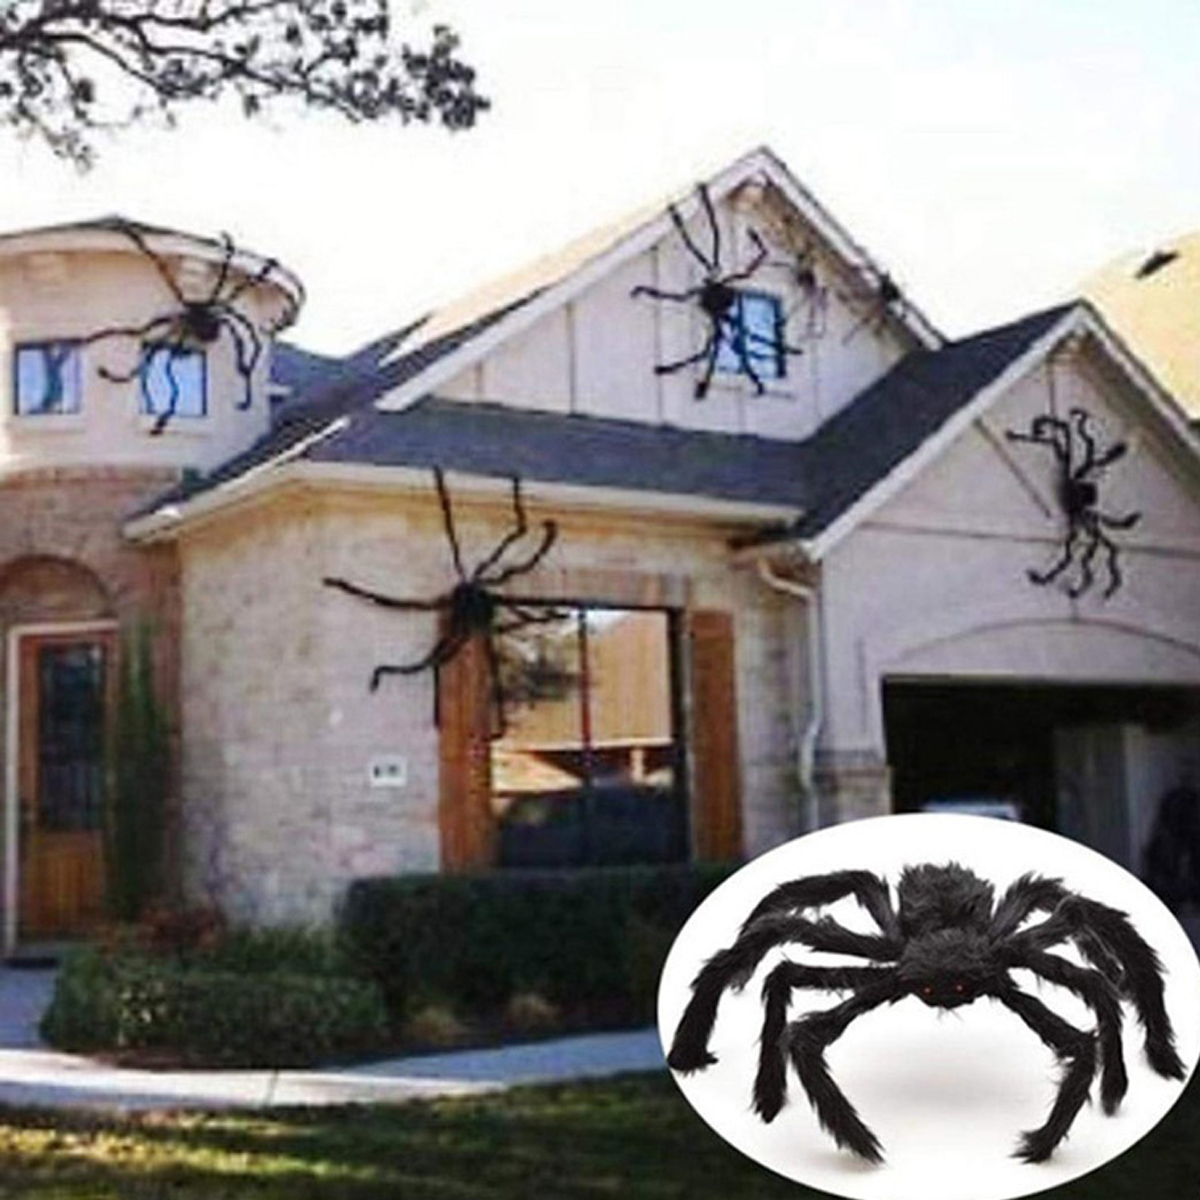 Halloween-Carnival-Spiders-Horror-Decoration-Haunted-House-Spider-Party-Decoration-Toys-1741778-2